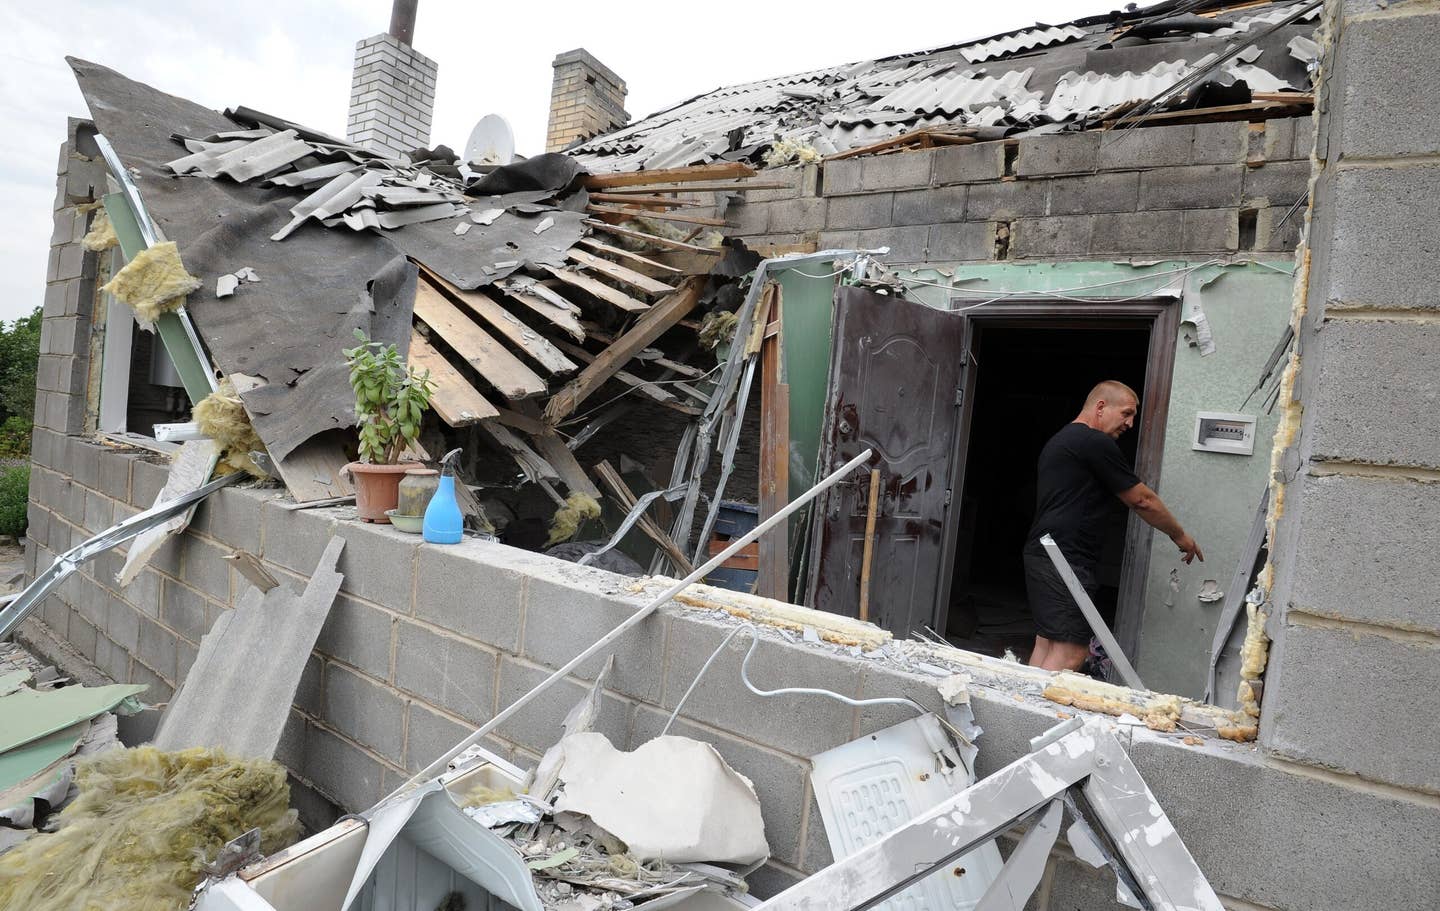 A man stands on July 13, 2014, in a house destroyed after bombardments in the village of Maryinka. (DOMINIQUE FAGET/AFP via Getty Images)